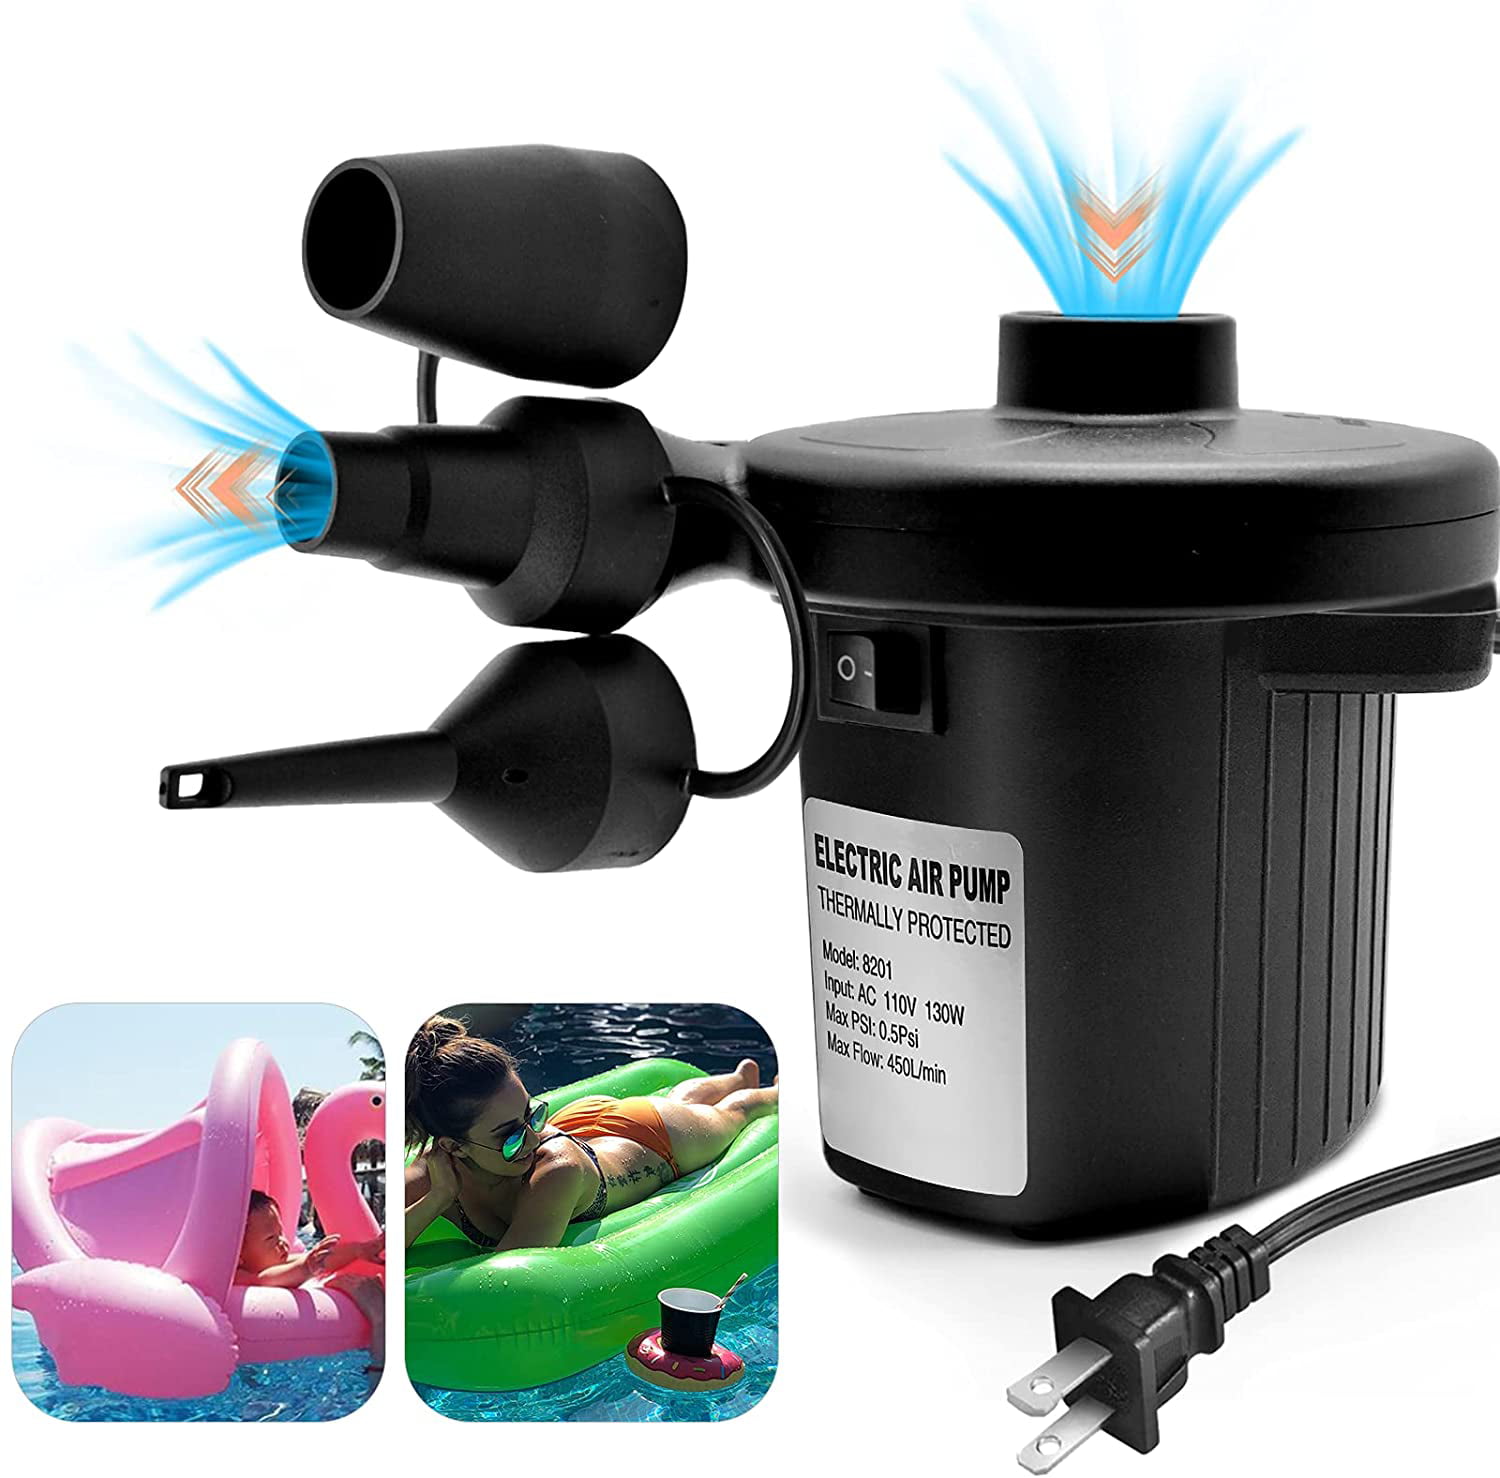 Electric Air Pump Inflator For Inflatable Bed Mattress Boat Paddling Pool Car 